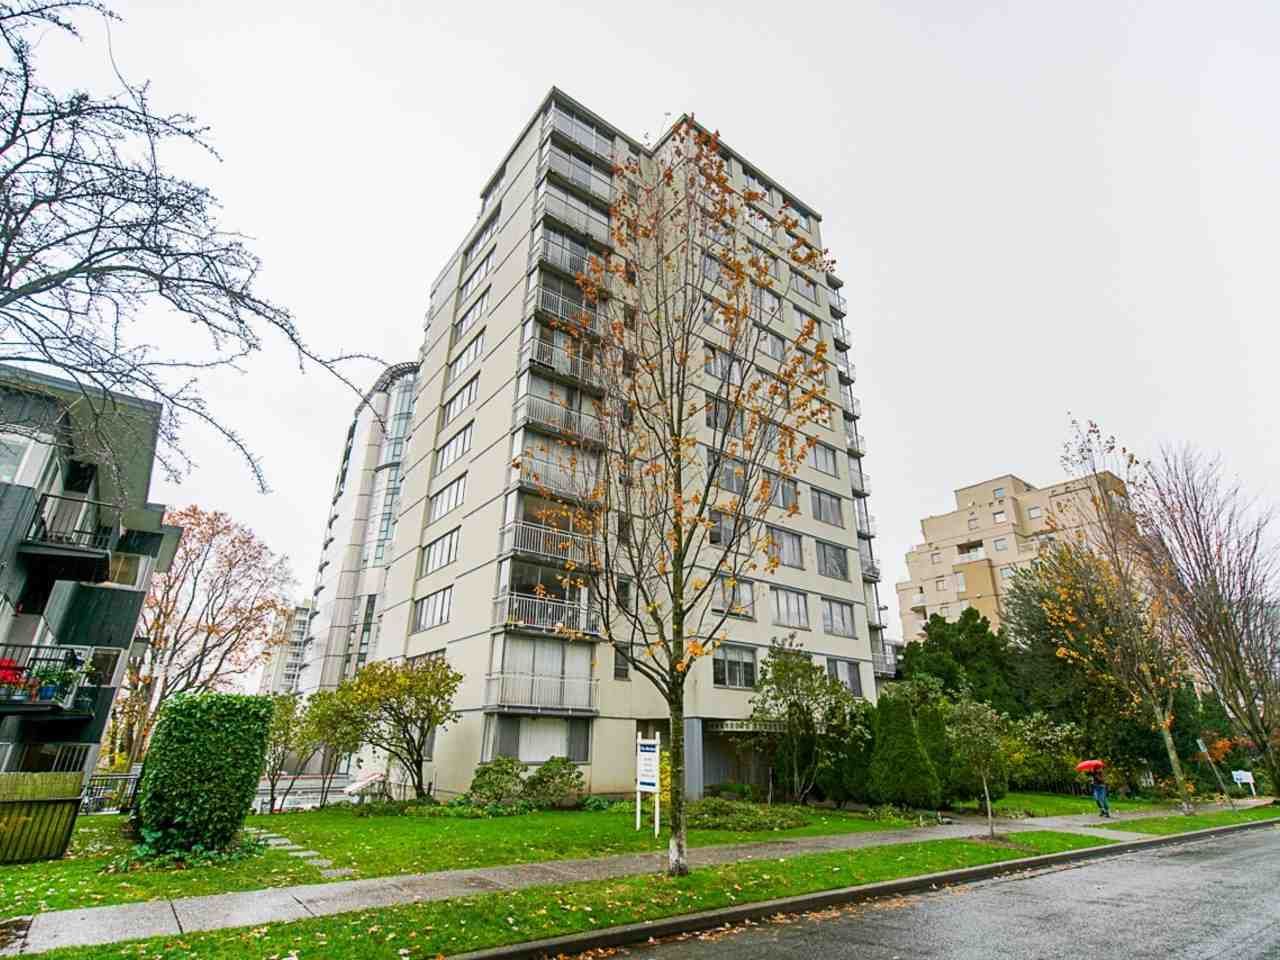 Main Photo: 208 1250 BURNABY STREET in : Downtown VW Condo for sale : MLS®# R2519163